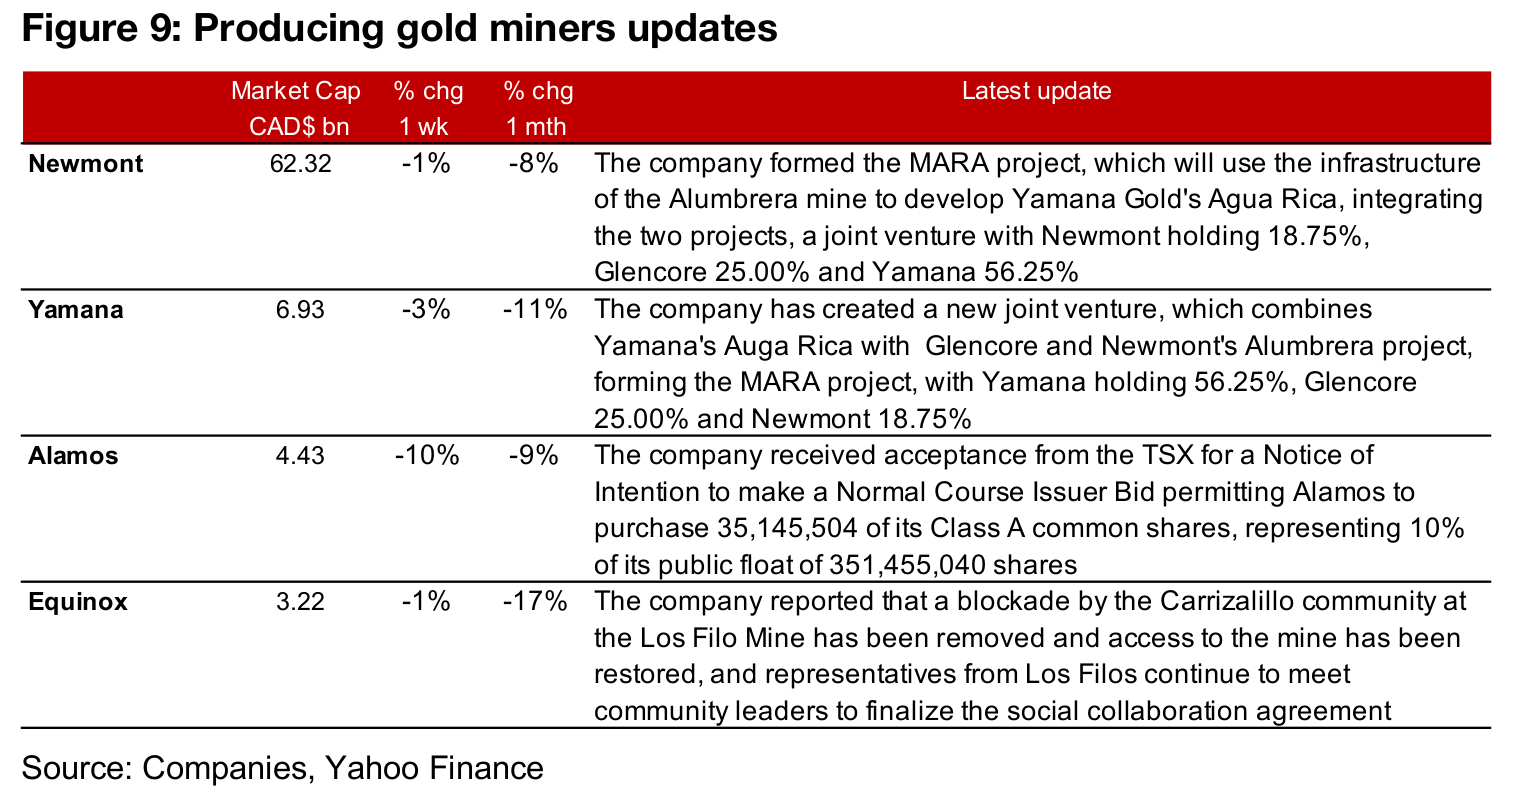 Producers mostly down on relatively flat gold